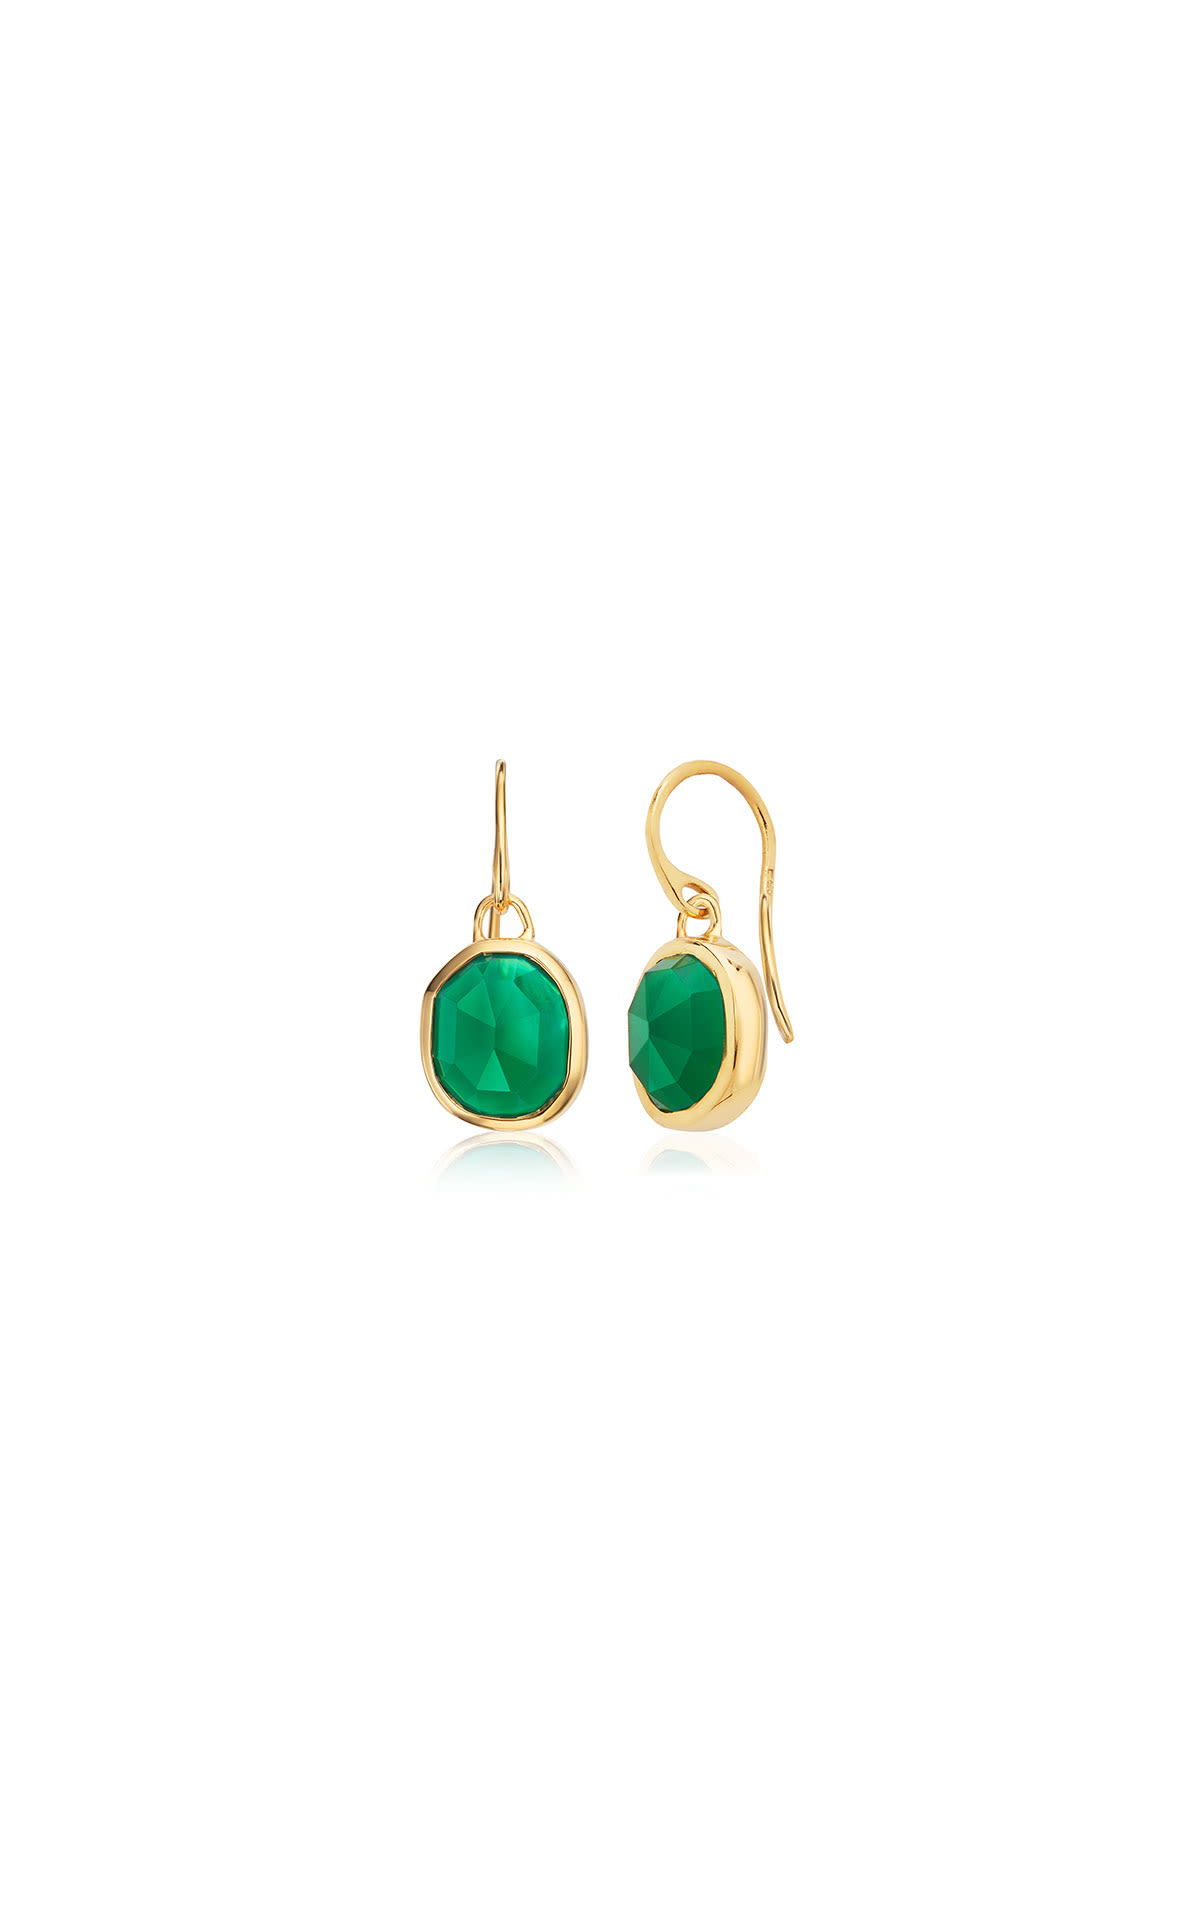 Monica Vinader GP Siren wire earrings green onyx from Bicester Village